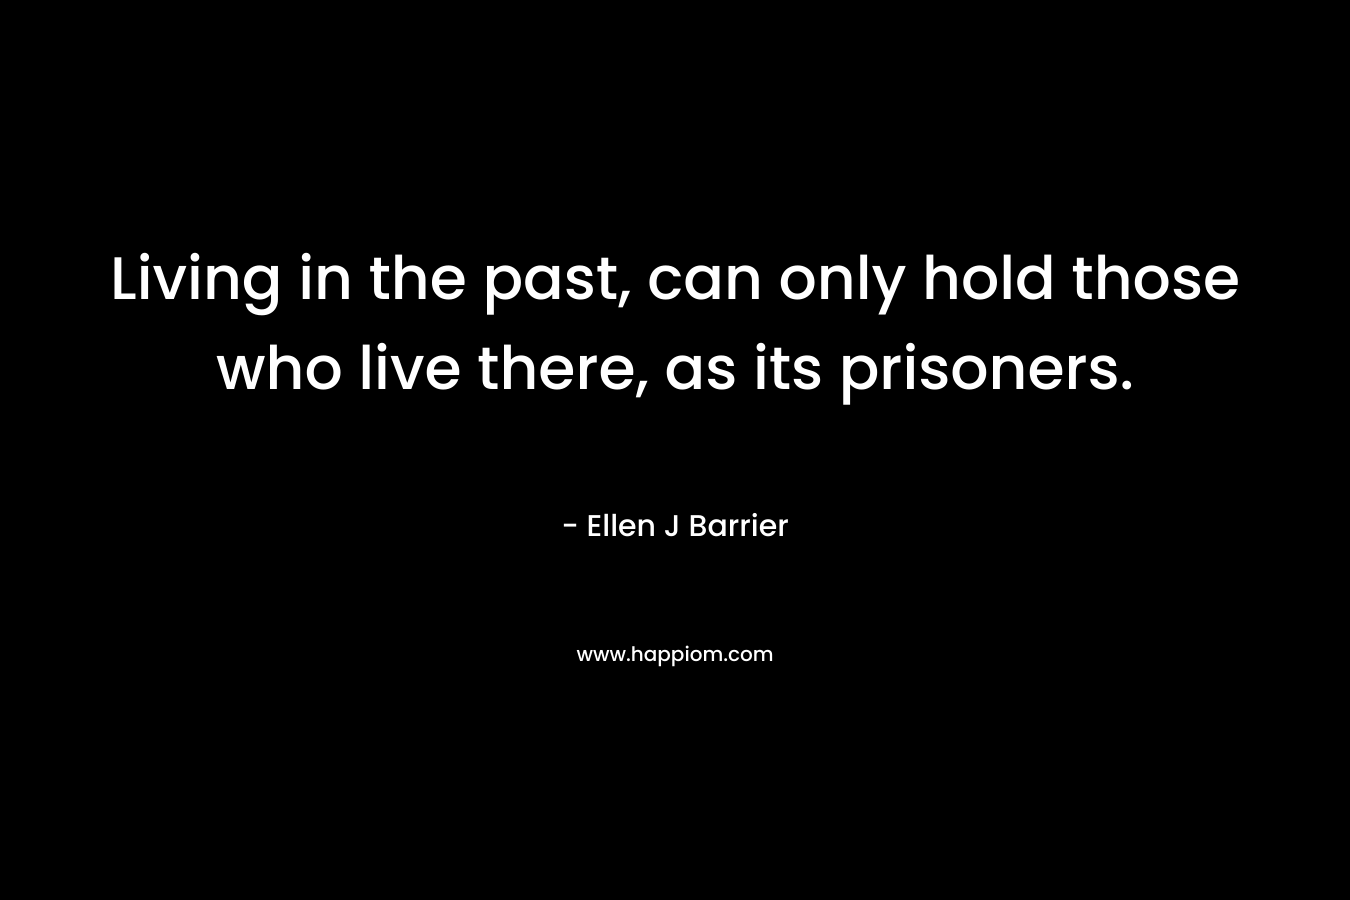 Living in the past, can only hold those who live there, as its prisoners. – Ellen J Barrier